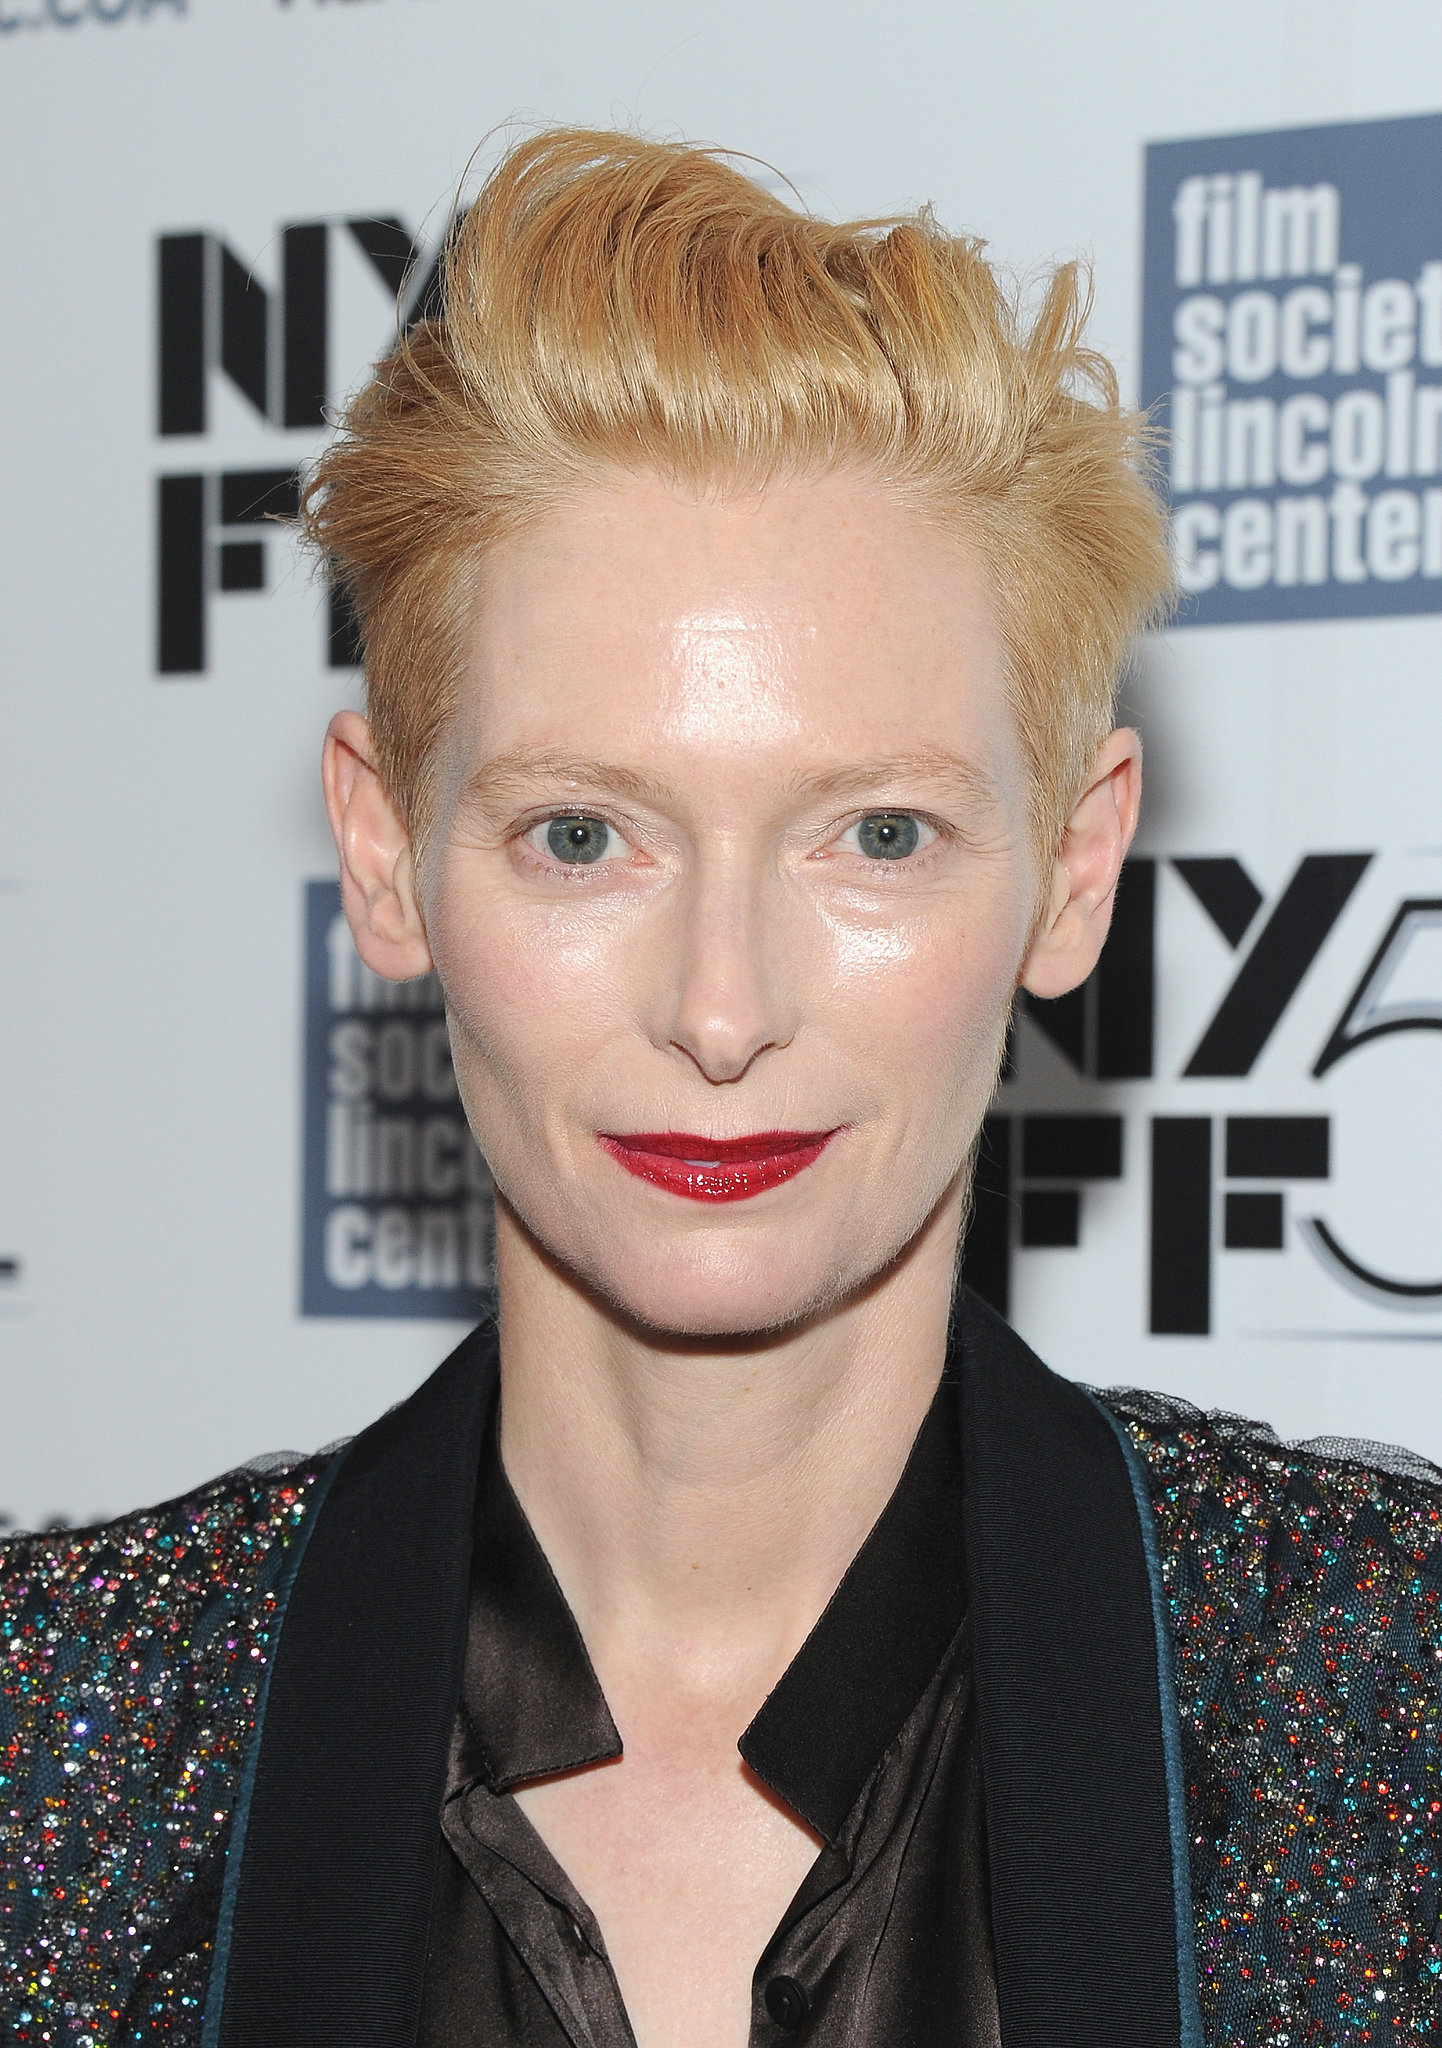 Only-Lovers-Left-Alive-red-carpet-Tilda-Swinton-accented-her